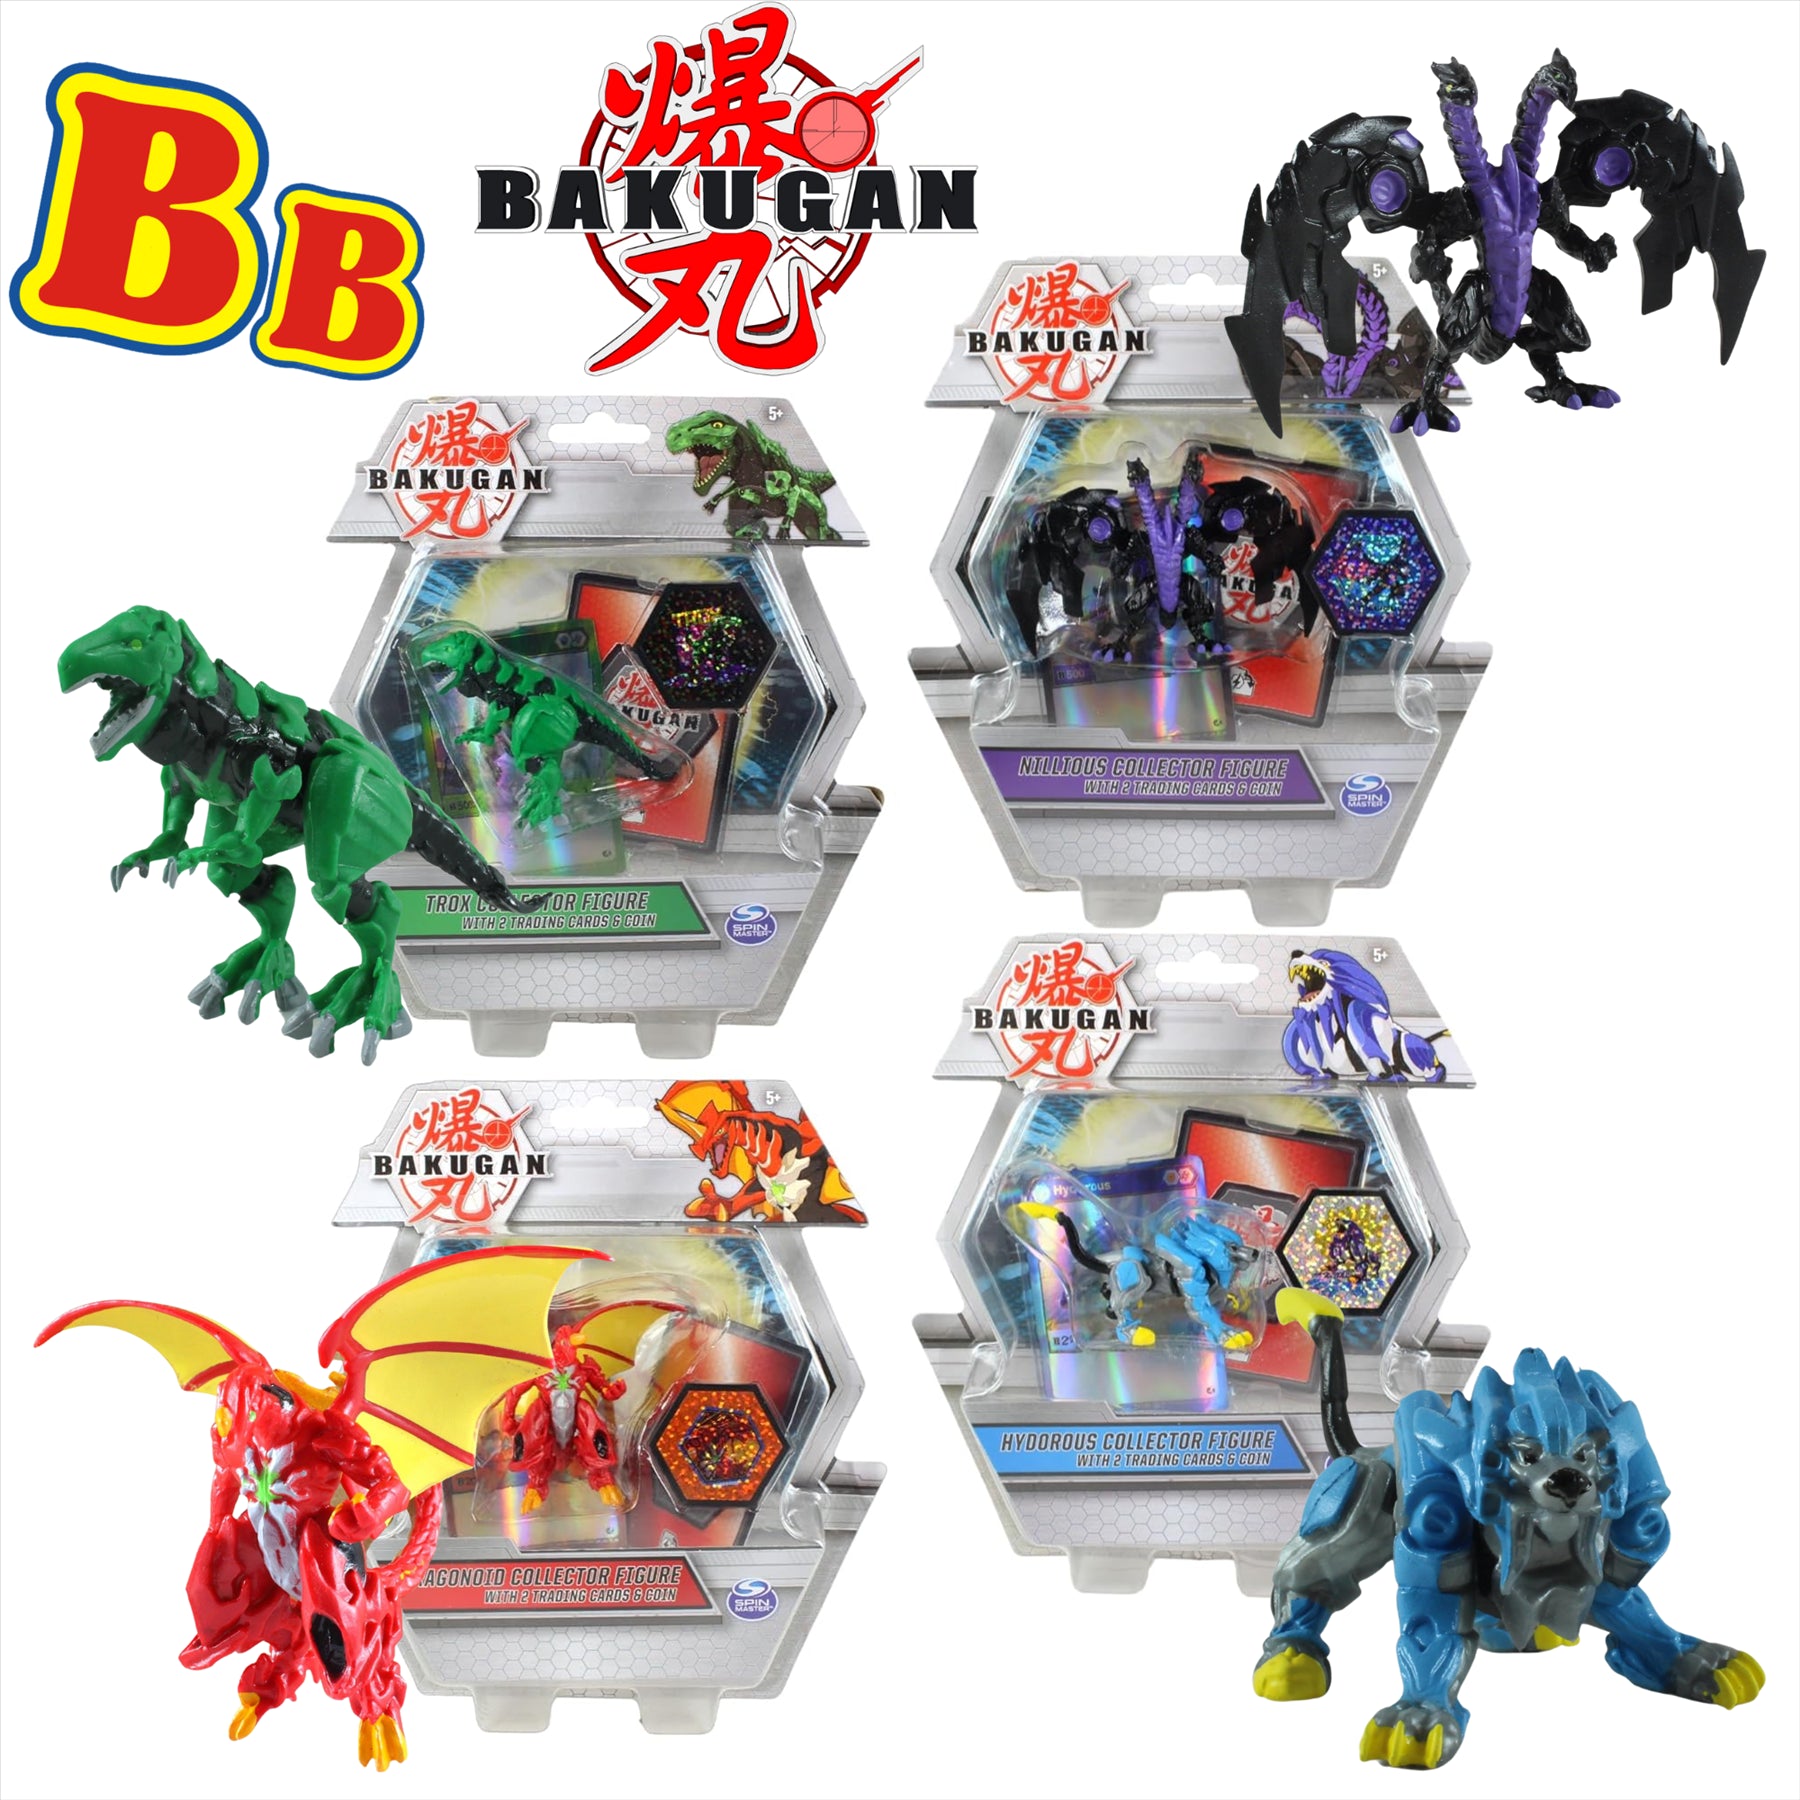 Bakugan - Deluxe Collector Figure Bundle With 2x Cards & Coin In Each Pack - 4 Pack - Set 1 - Toptoys2u